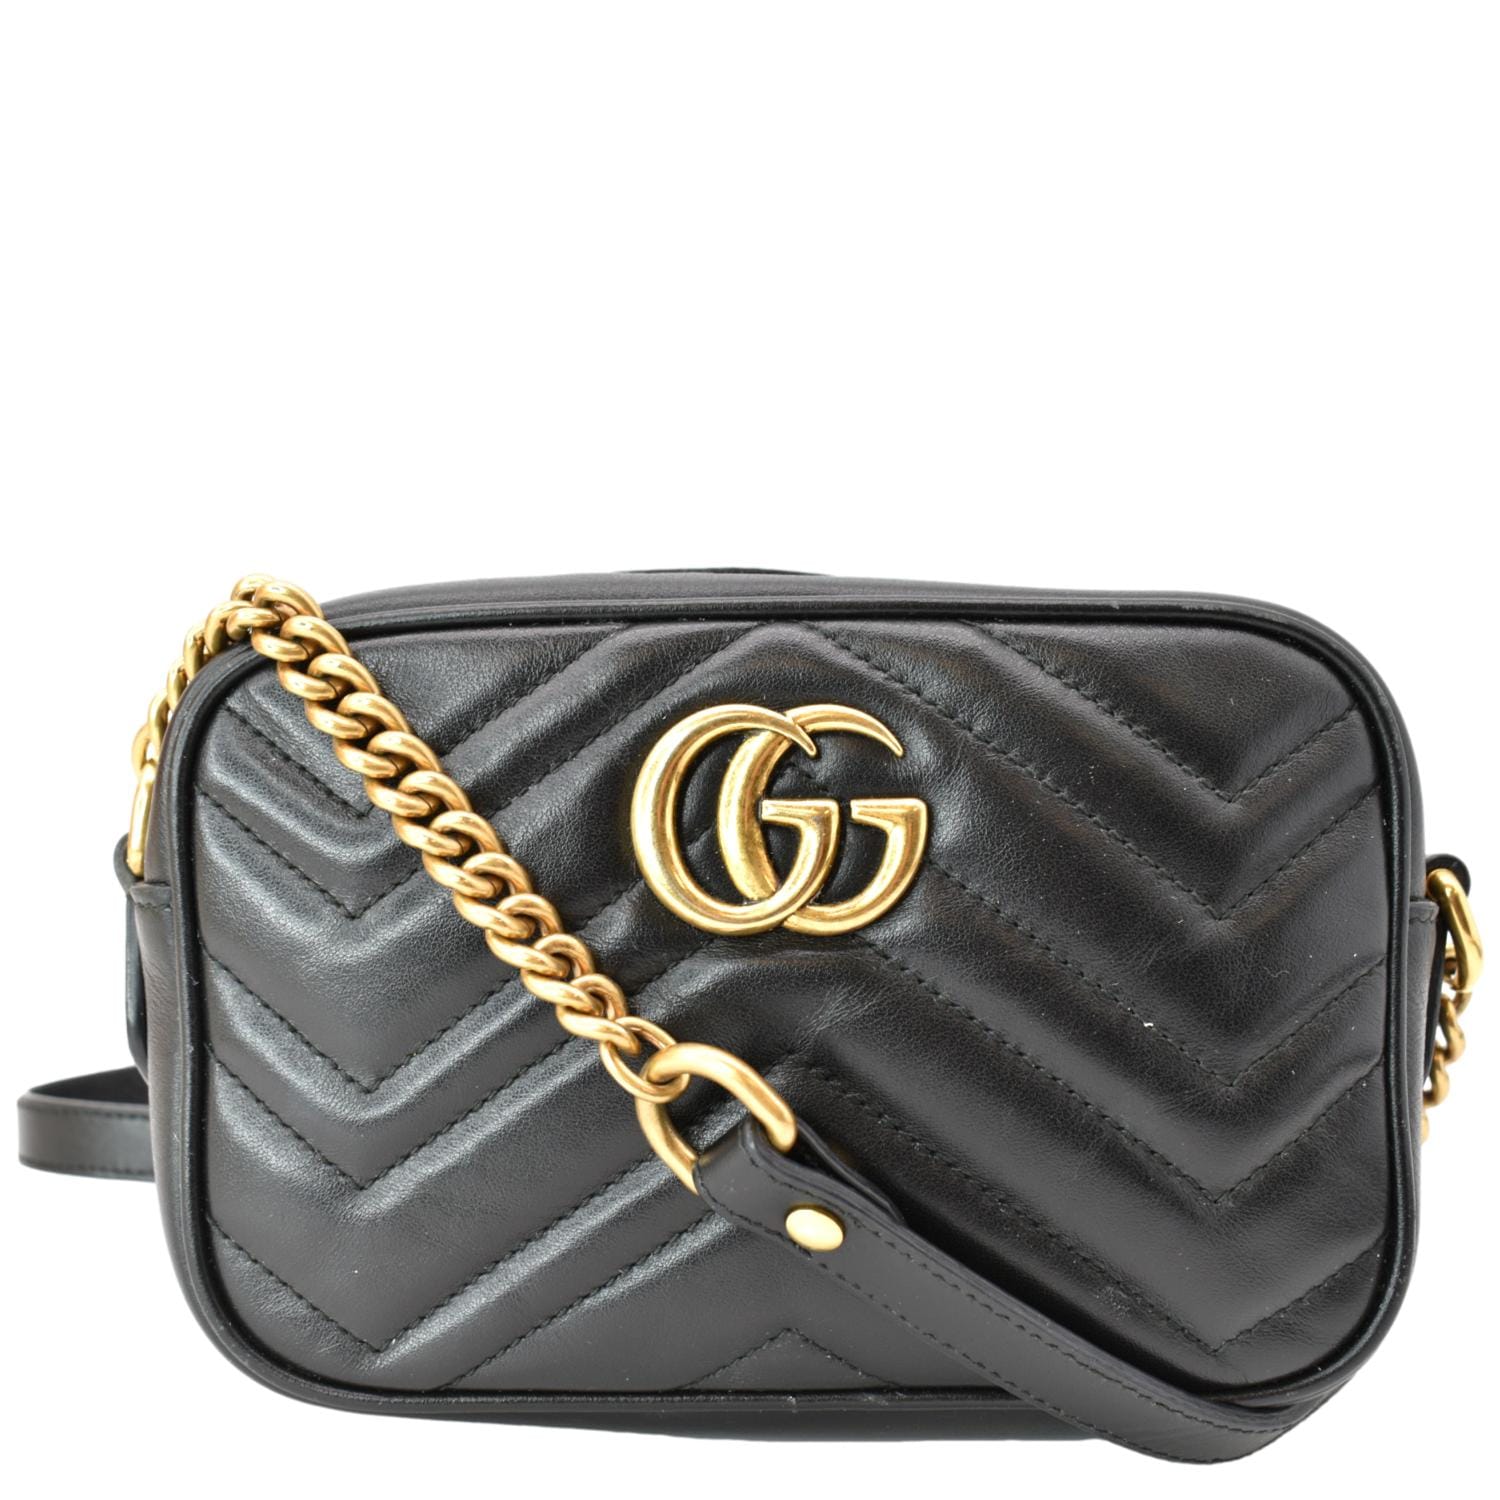 GUCCI GG Marmont Small Camera Bag in Black Leather